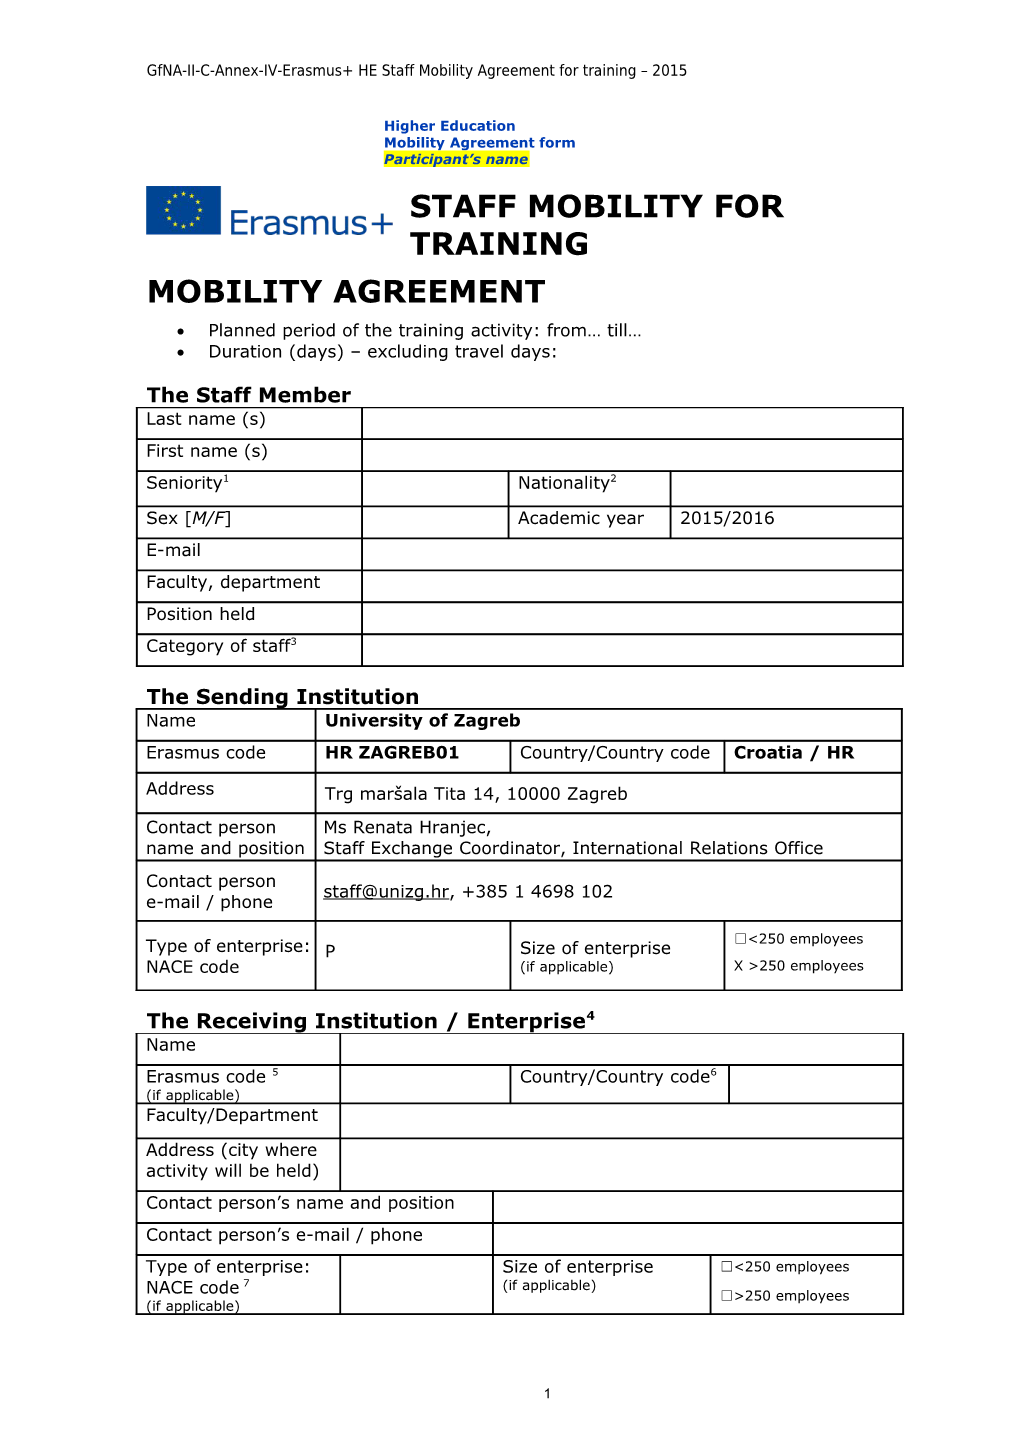 Gfna-II-C-Annex-IV-Erasmus+ HE Staff Mobility Agreement for Training 2015